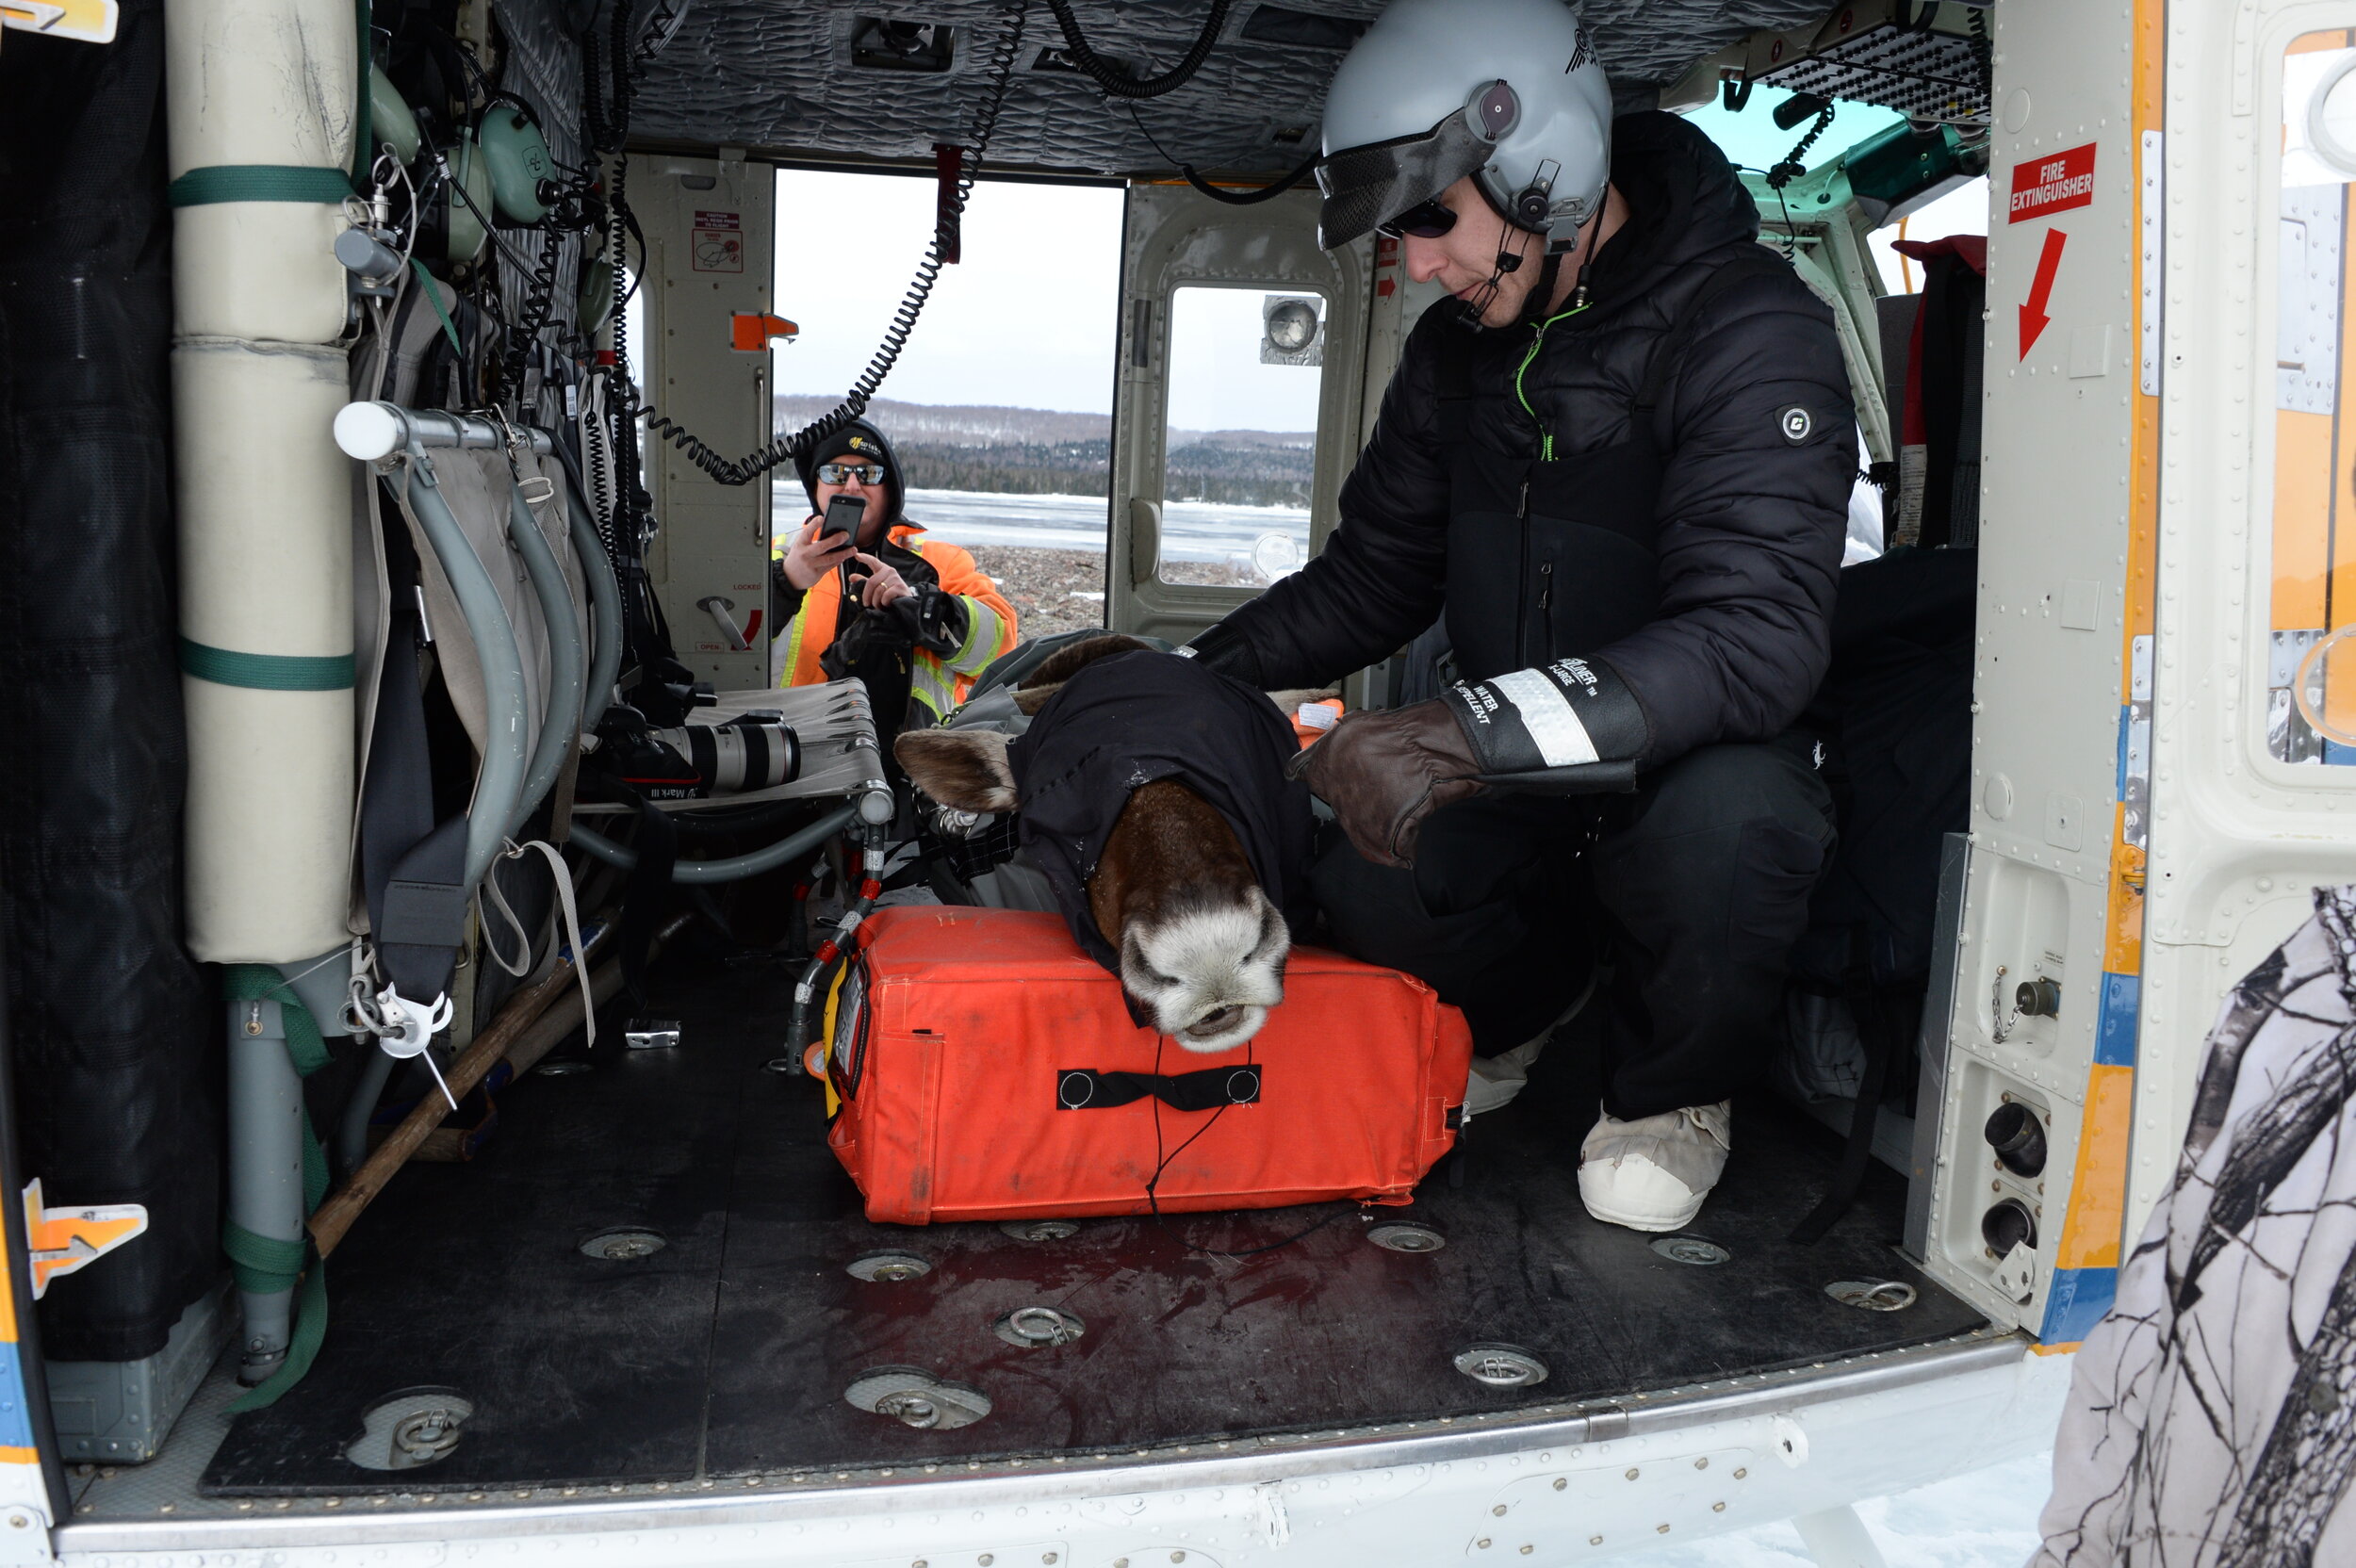 A person rubs a blindfolded caribou inside a helicopter